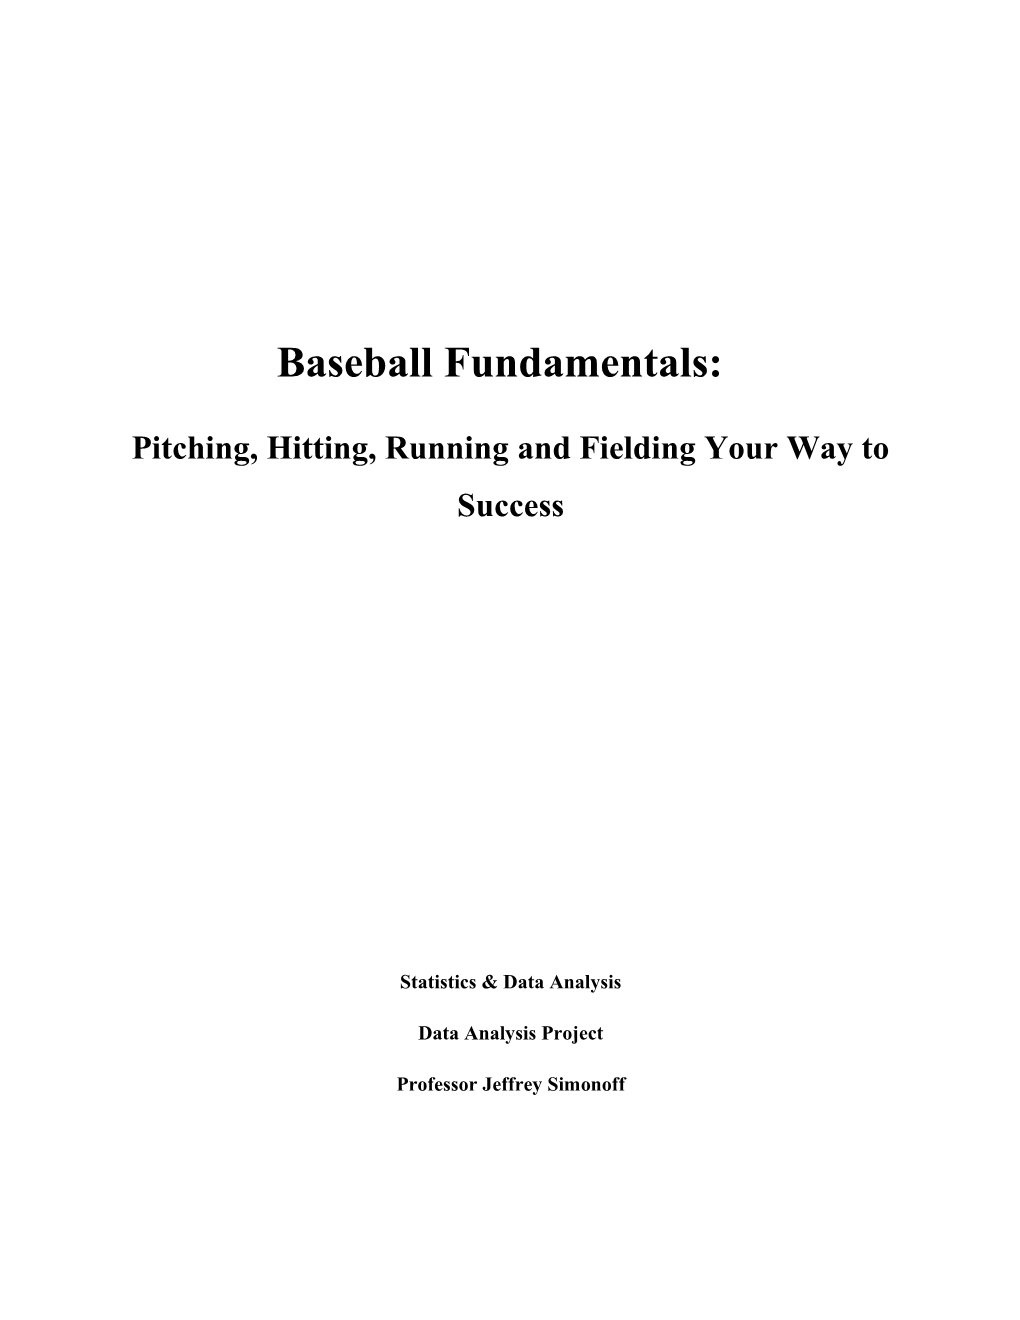 Pitching, Hitting, Running and Fielding Your Way to Success